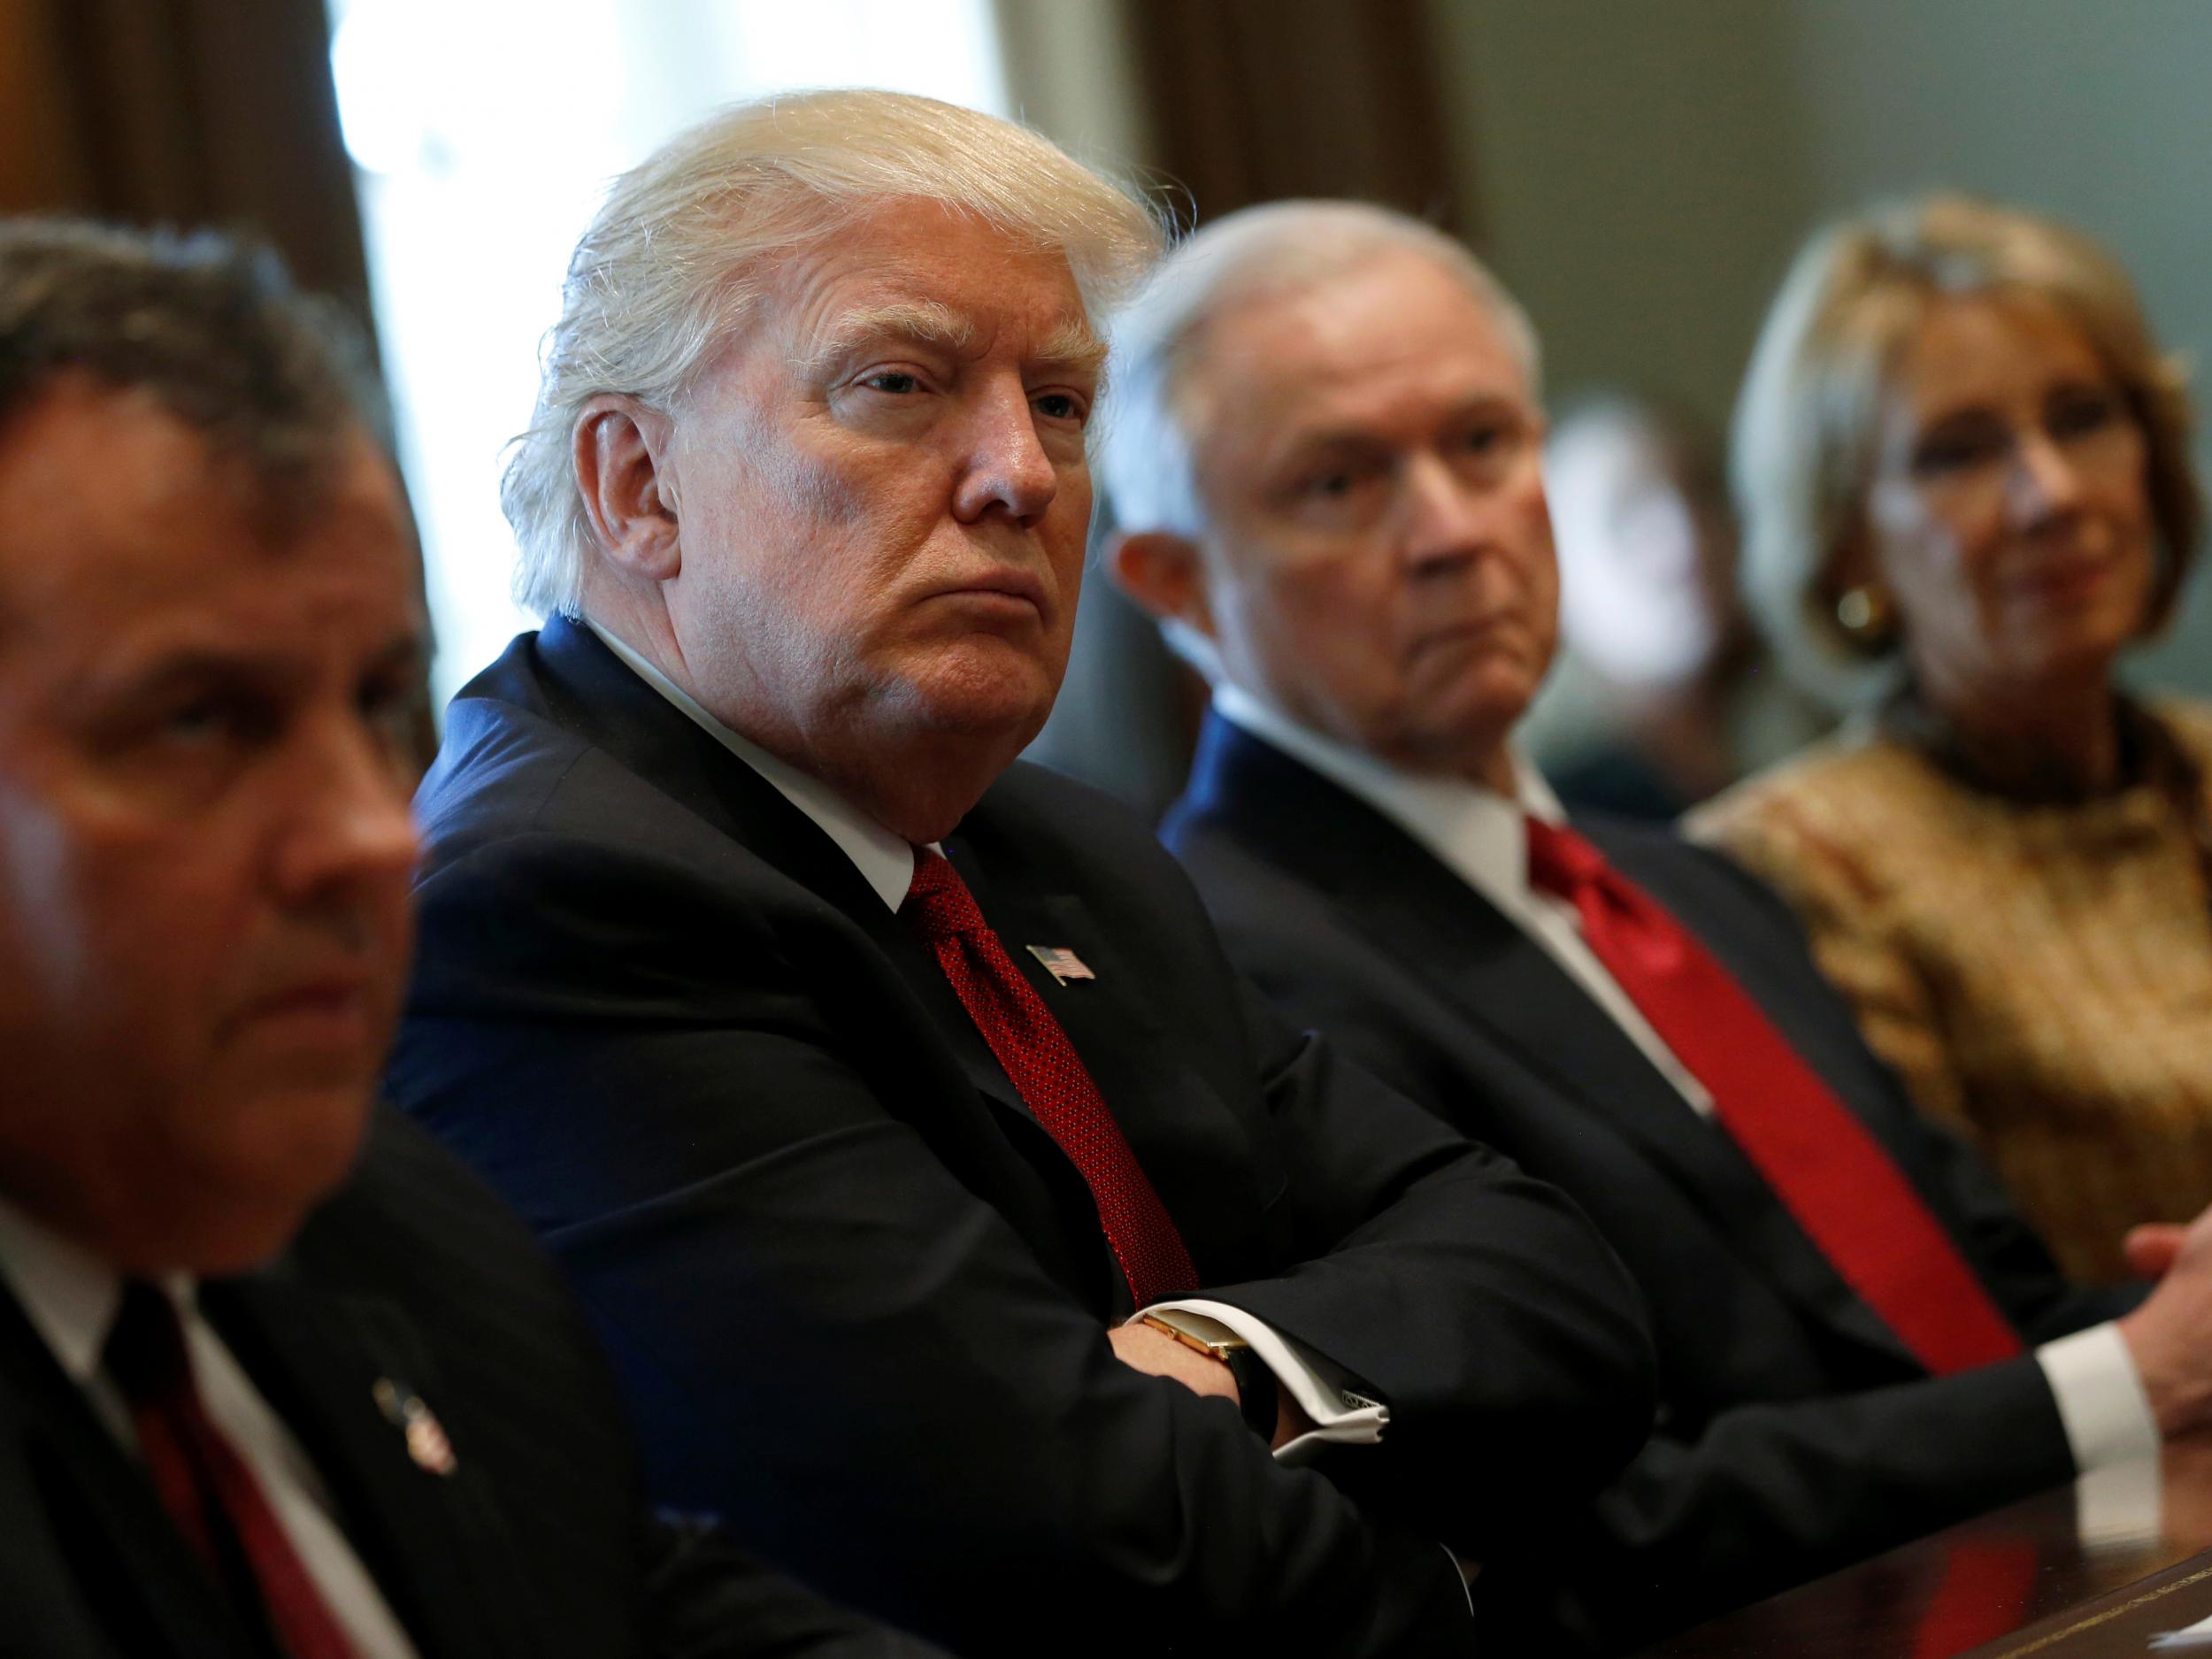 US President Donald Trump, flanked by New Jersey Governor Chris Christie, Attorney General Jeff Sessions and Education Secretary Betsy DeVos, holds an opioid and drug abuse listening session at the White House